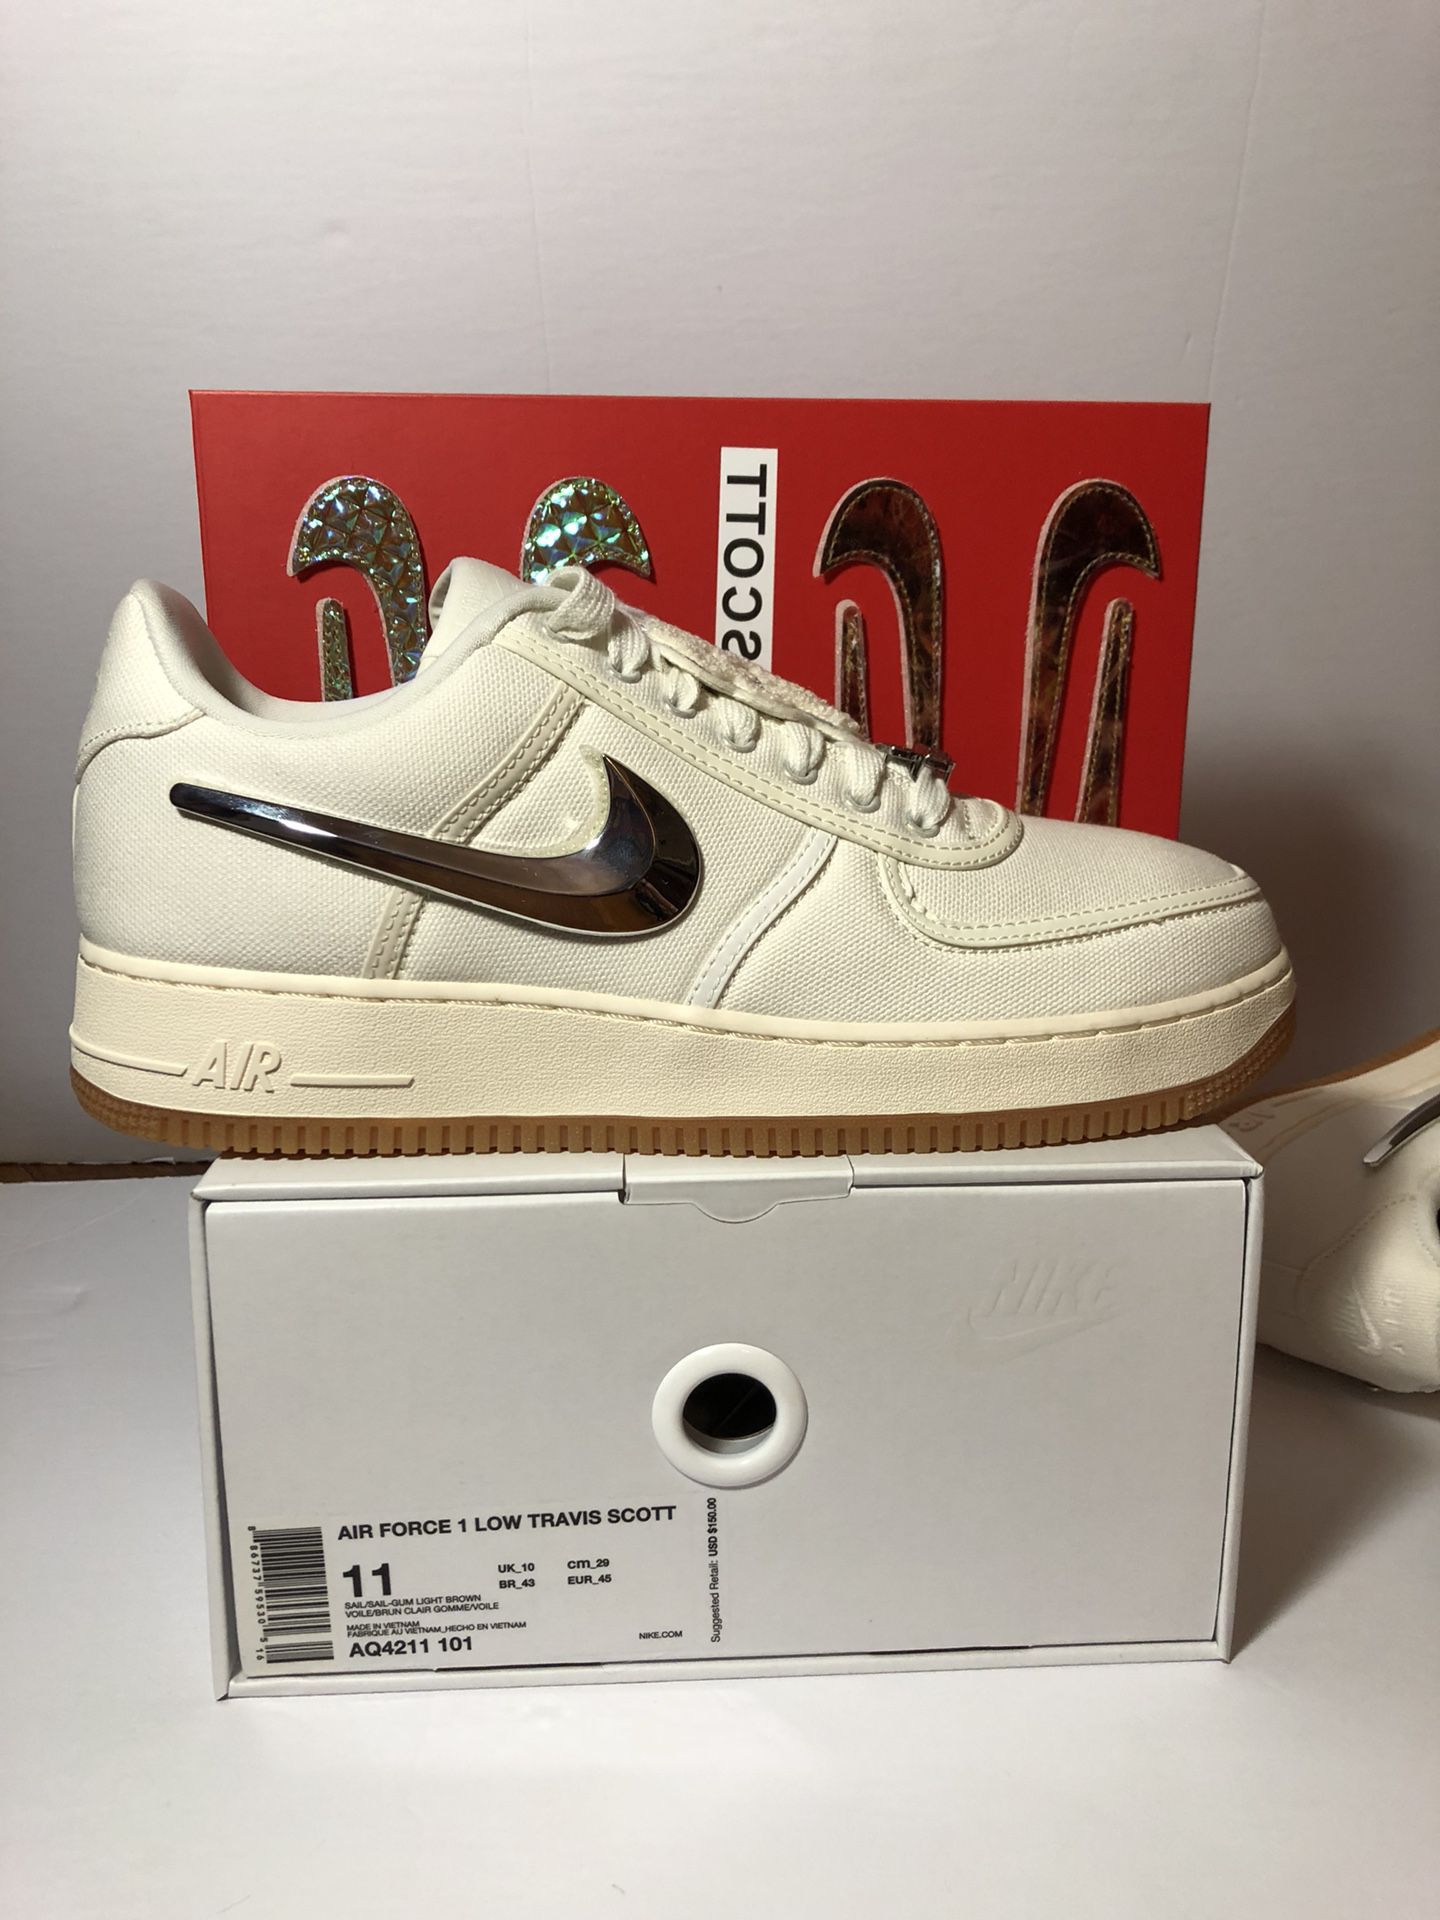 Harnas bloeden Weglaten Travis Scott Nike Air Force 1 One Sail Patch AF1 White Peel Astroworld  Cactus Jack for Sale in Providence, RI - OfferUp